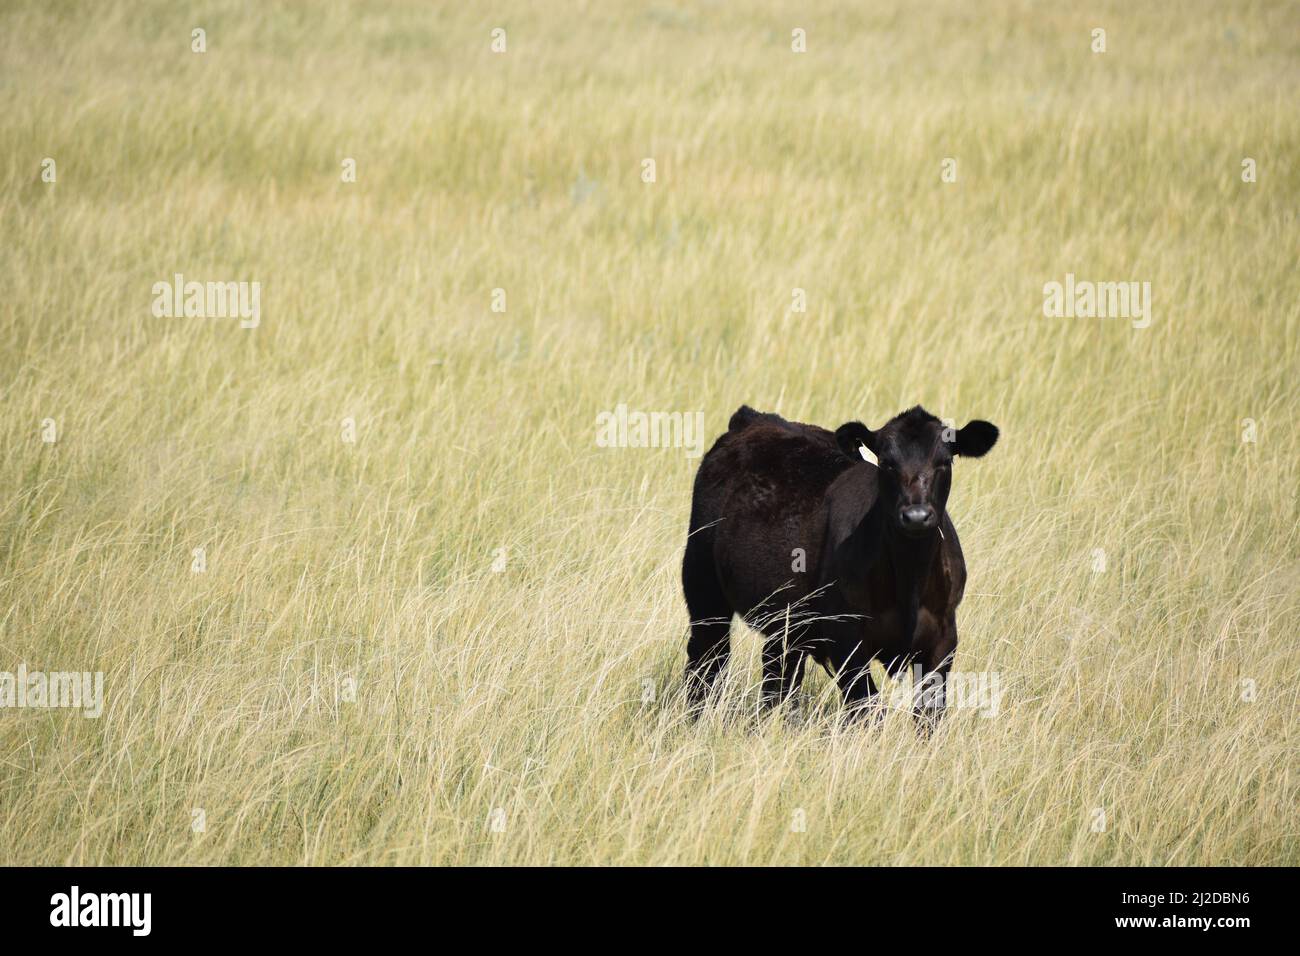 Black angus cow standing in a dry field on the plains of eastern Colorado - August 2021 Stock Photo